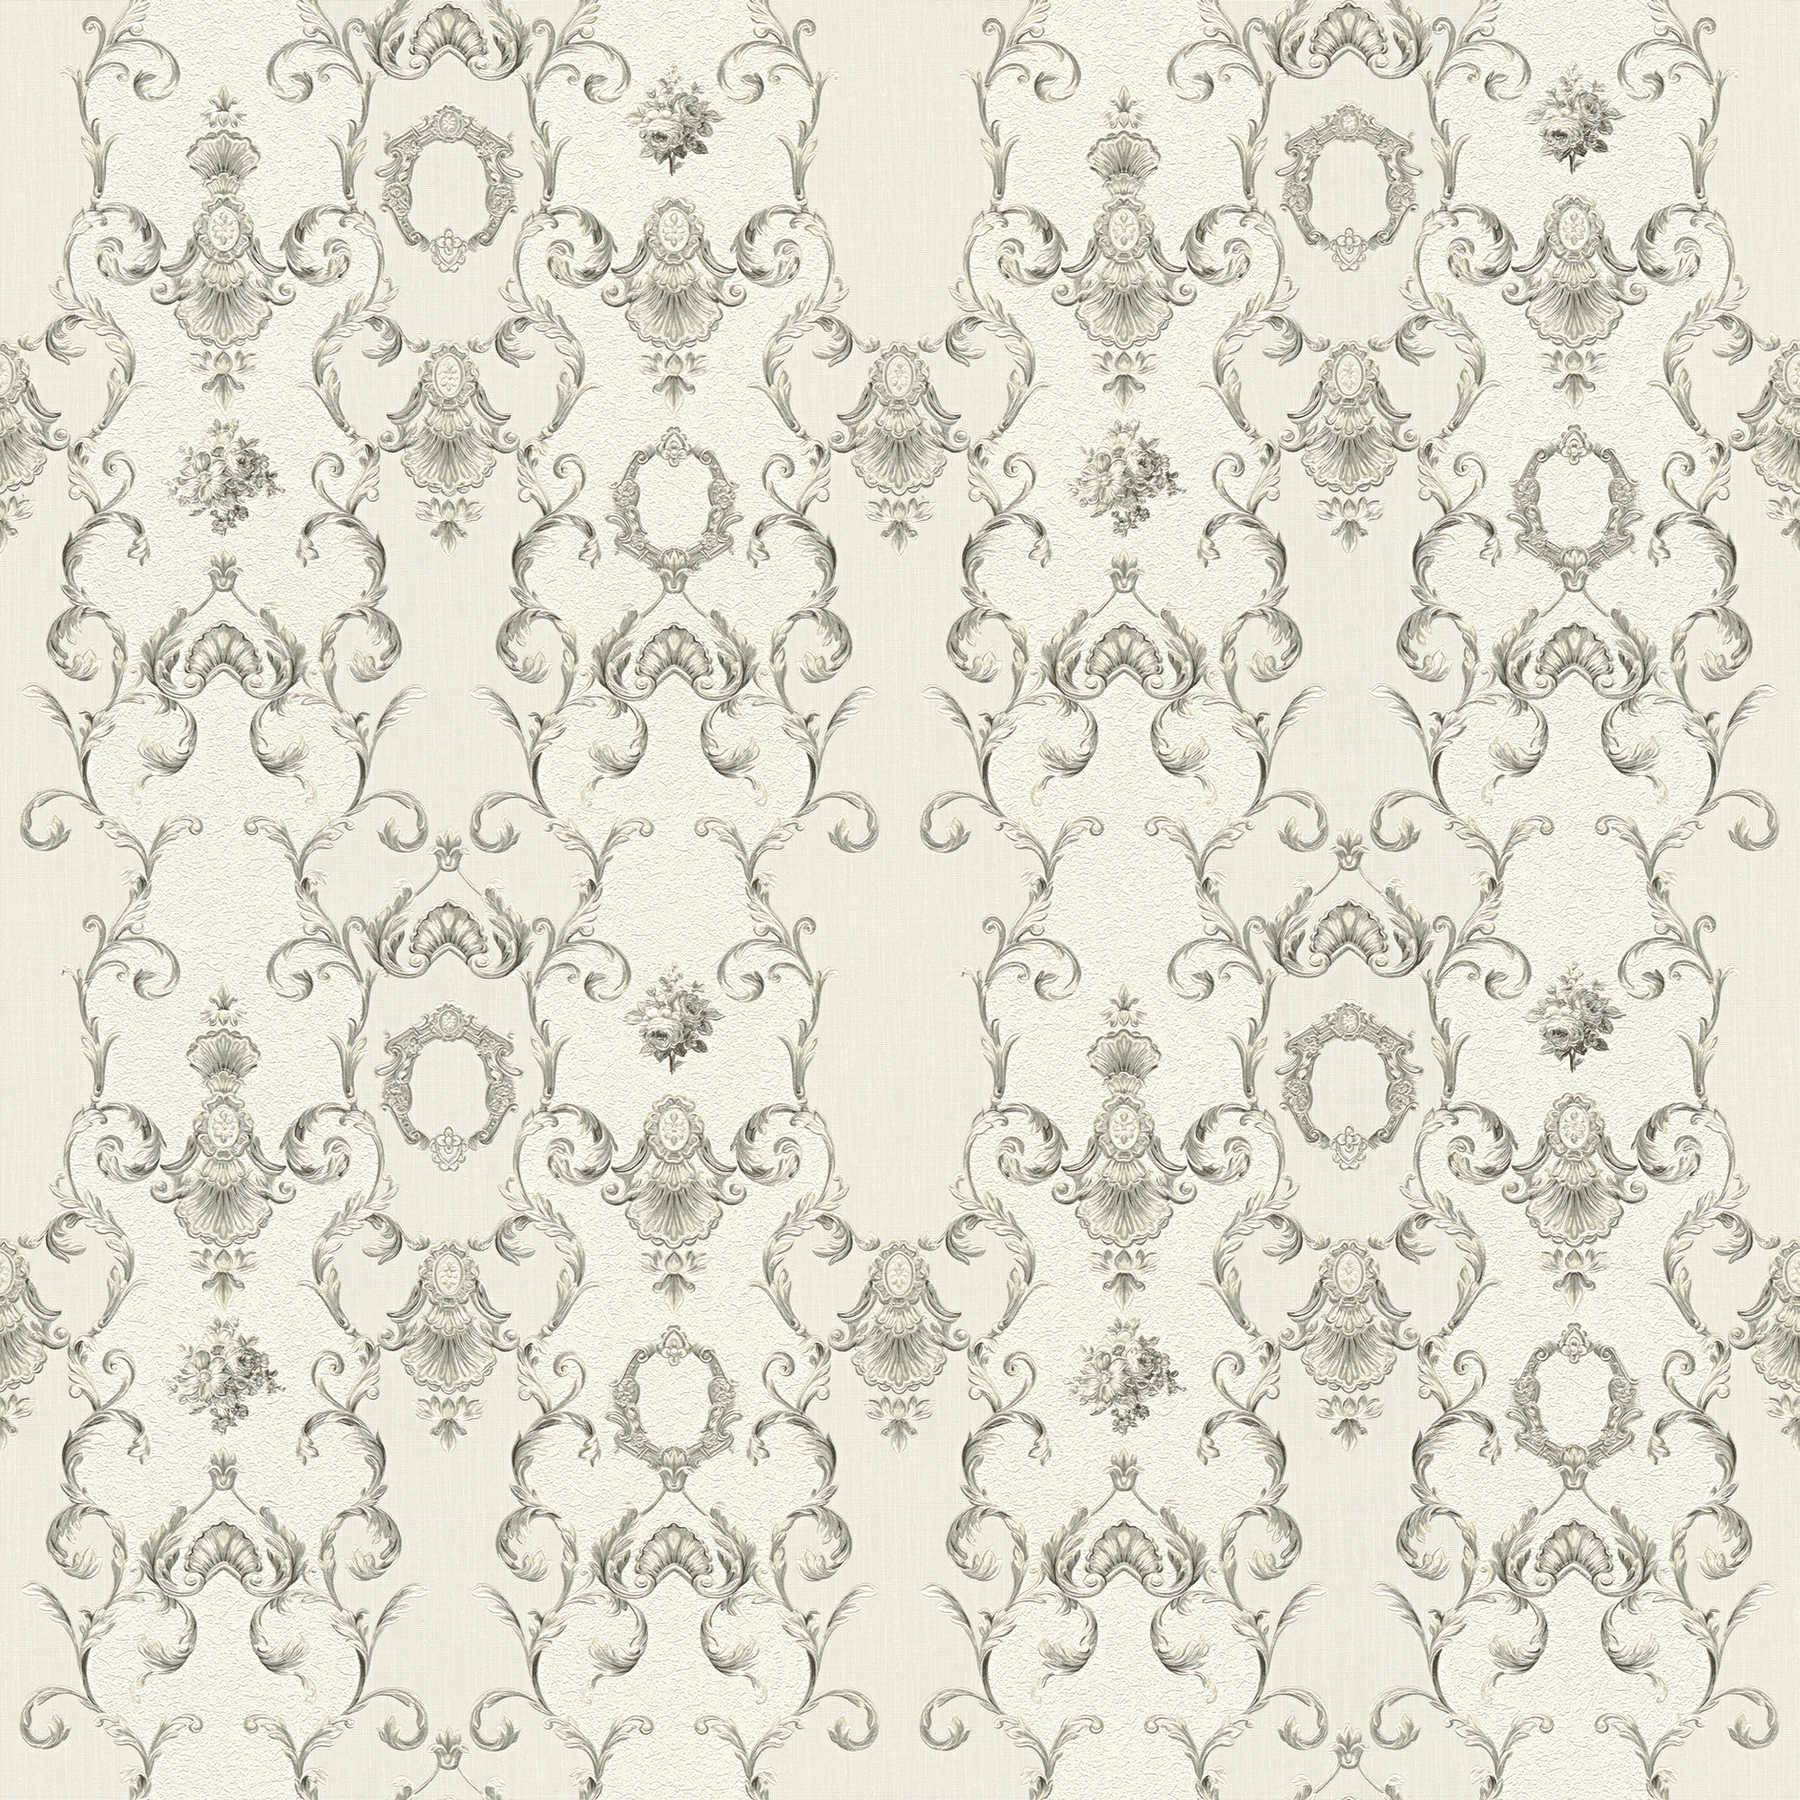 Ornament wallpaper classicism style with metallic design - grey, white
